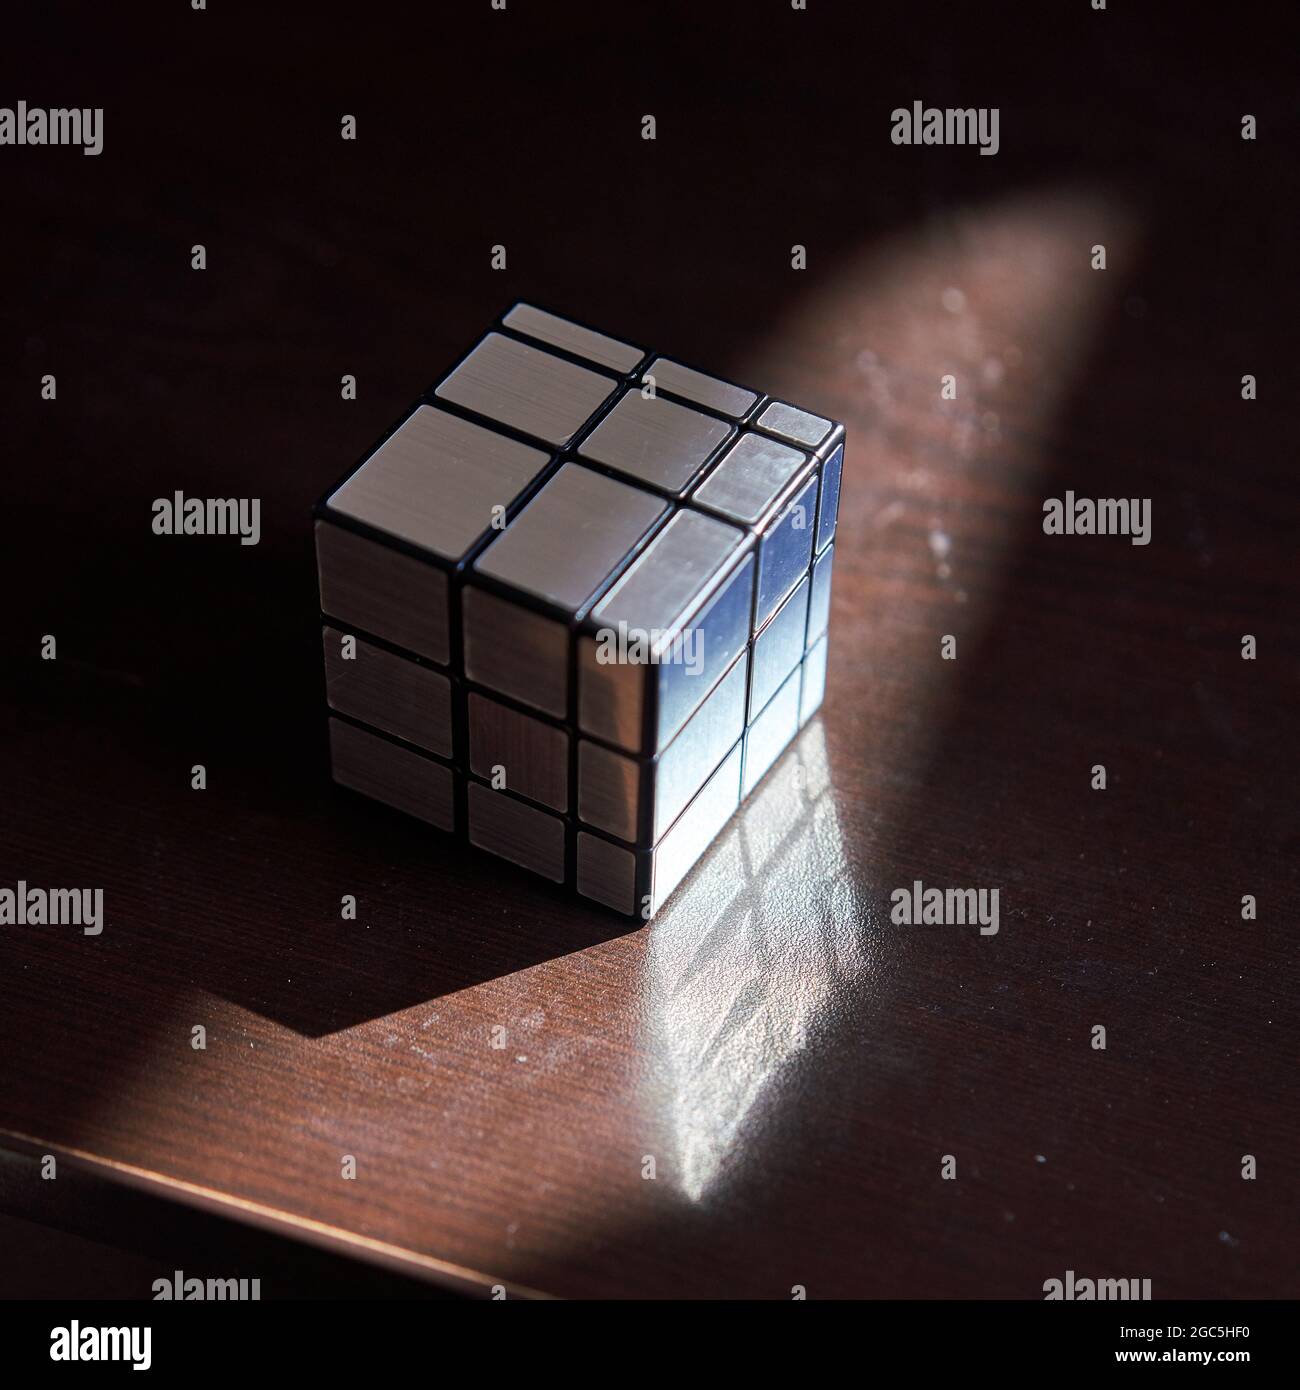 Mirror faces monotone Rubik's cube solved on tabletop with sunlight. Stock Photo